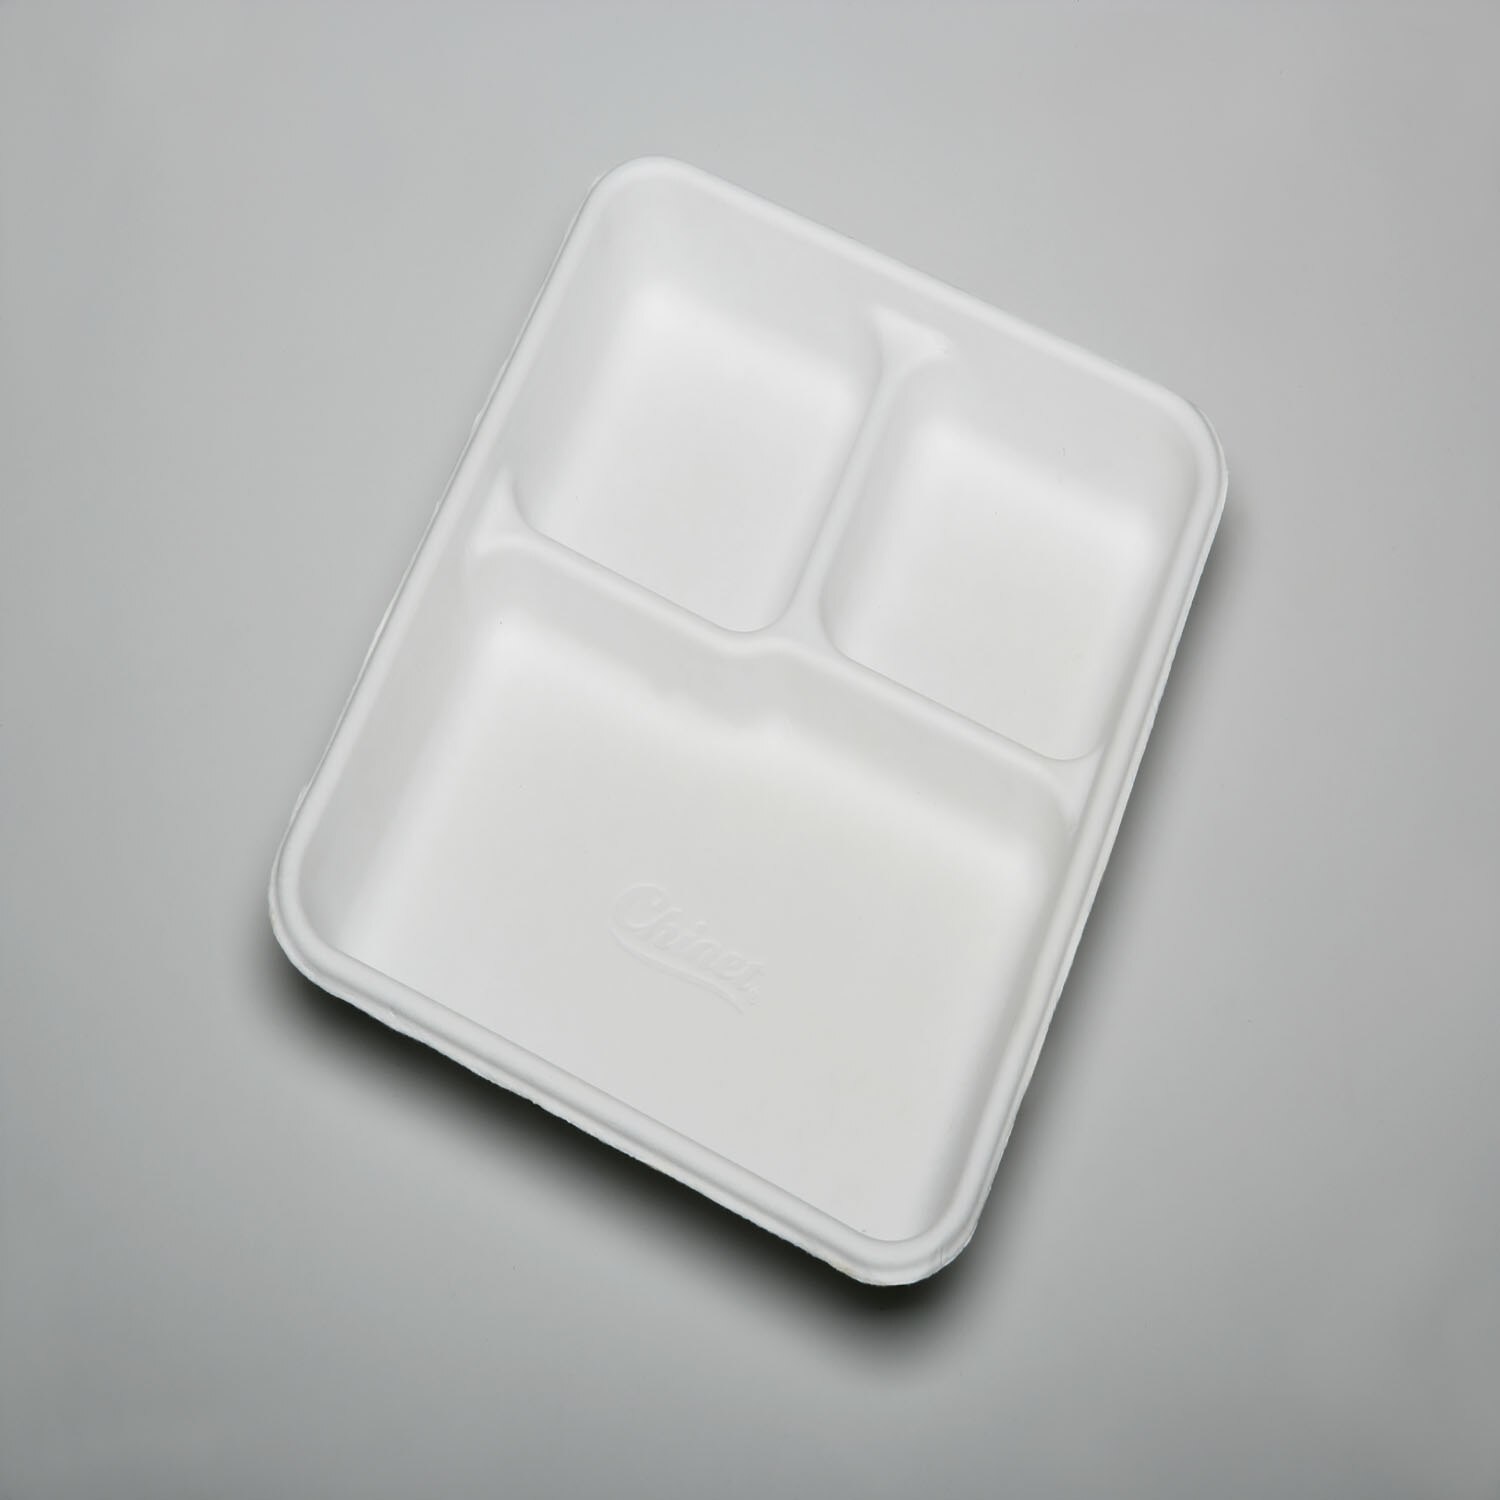 Plate, Paper, Disposable, 3-Compartmented Tray, Rectangular, White, 8" x 10"